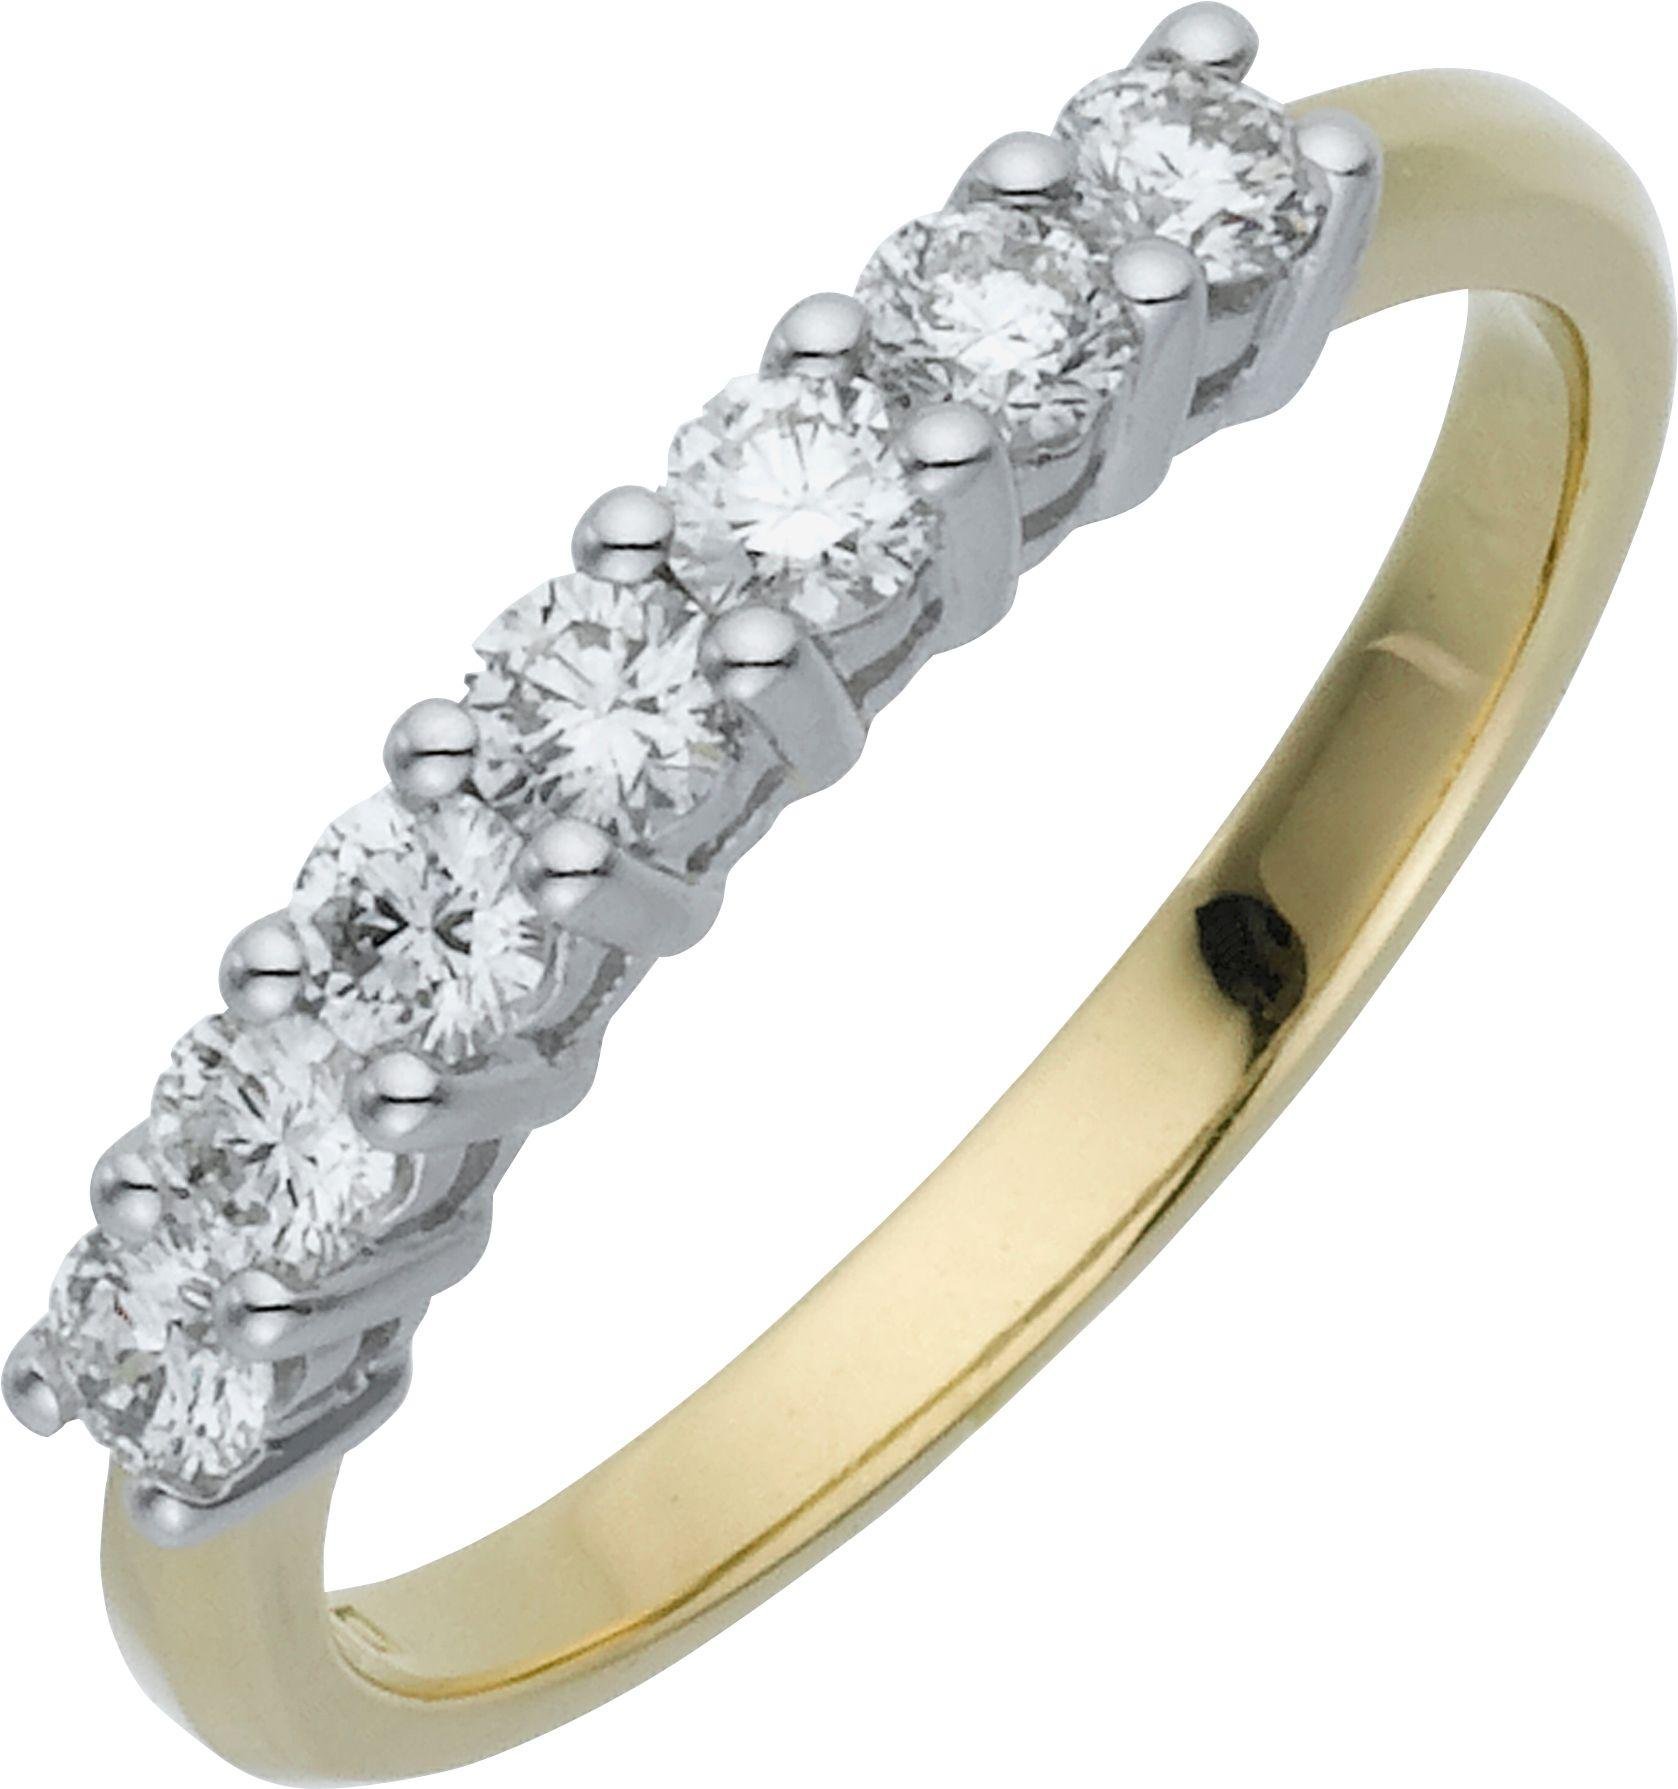 Everlasting Love 9ct Gold 7 Stone Eternity Ring - Size M